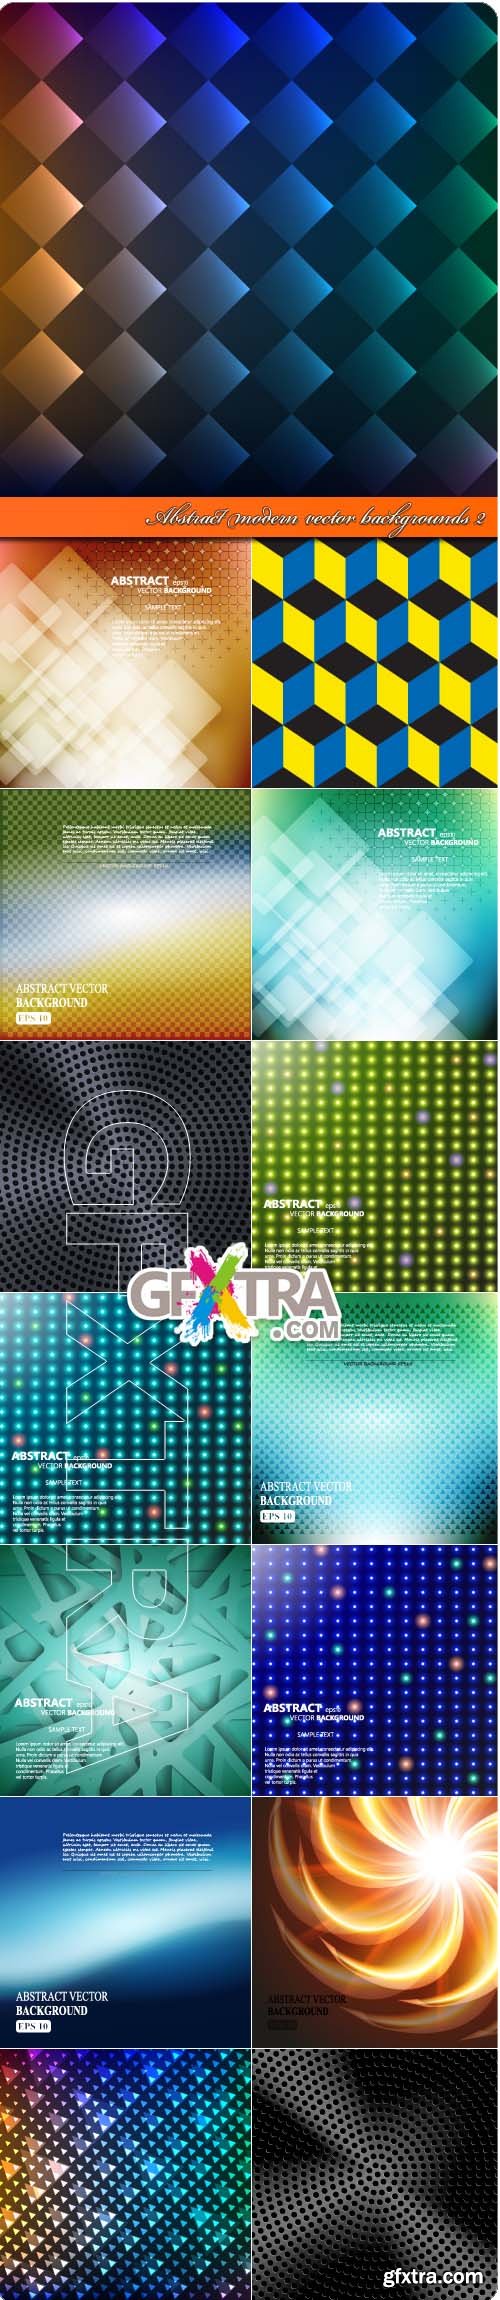 Abstract modern vector backgrounds 2